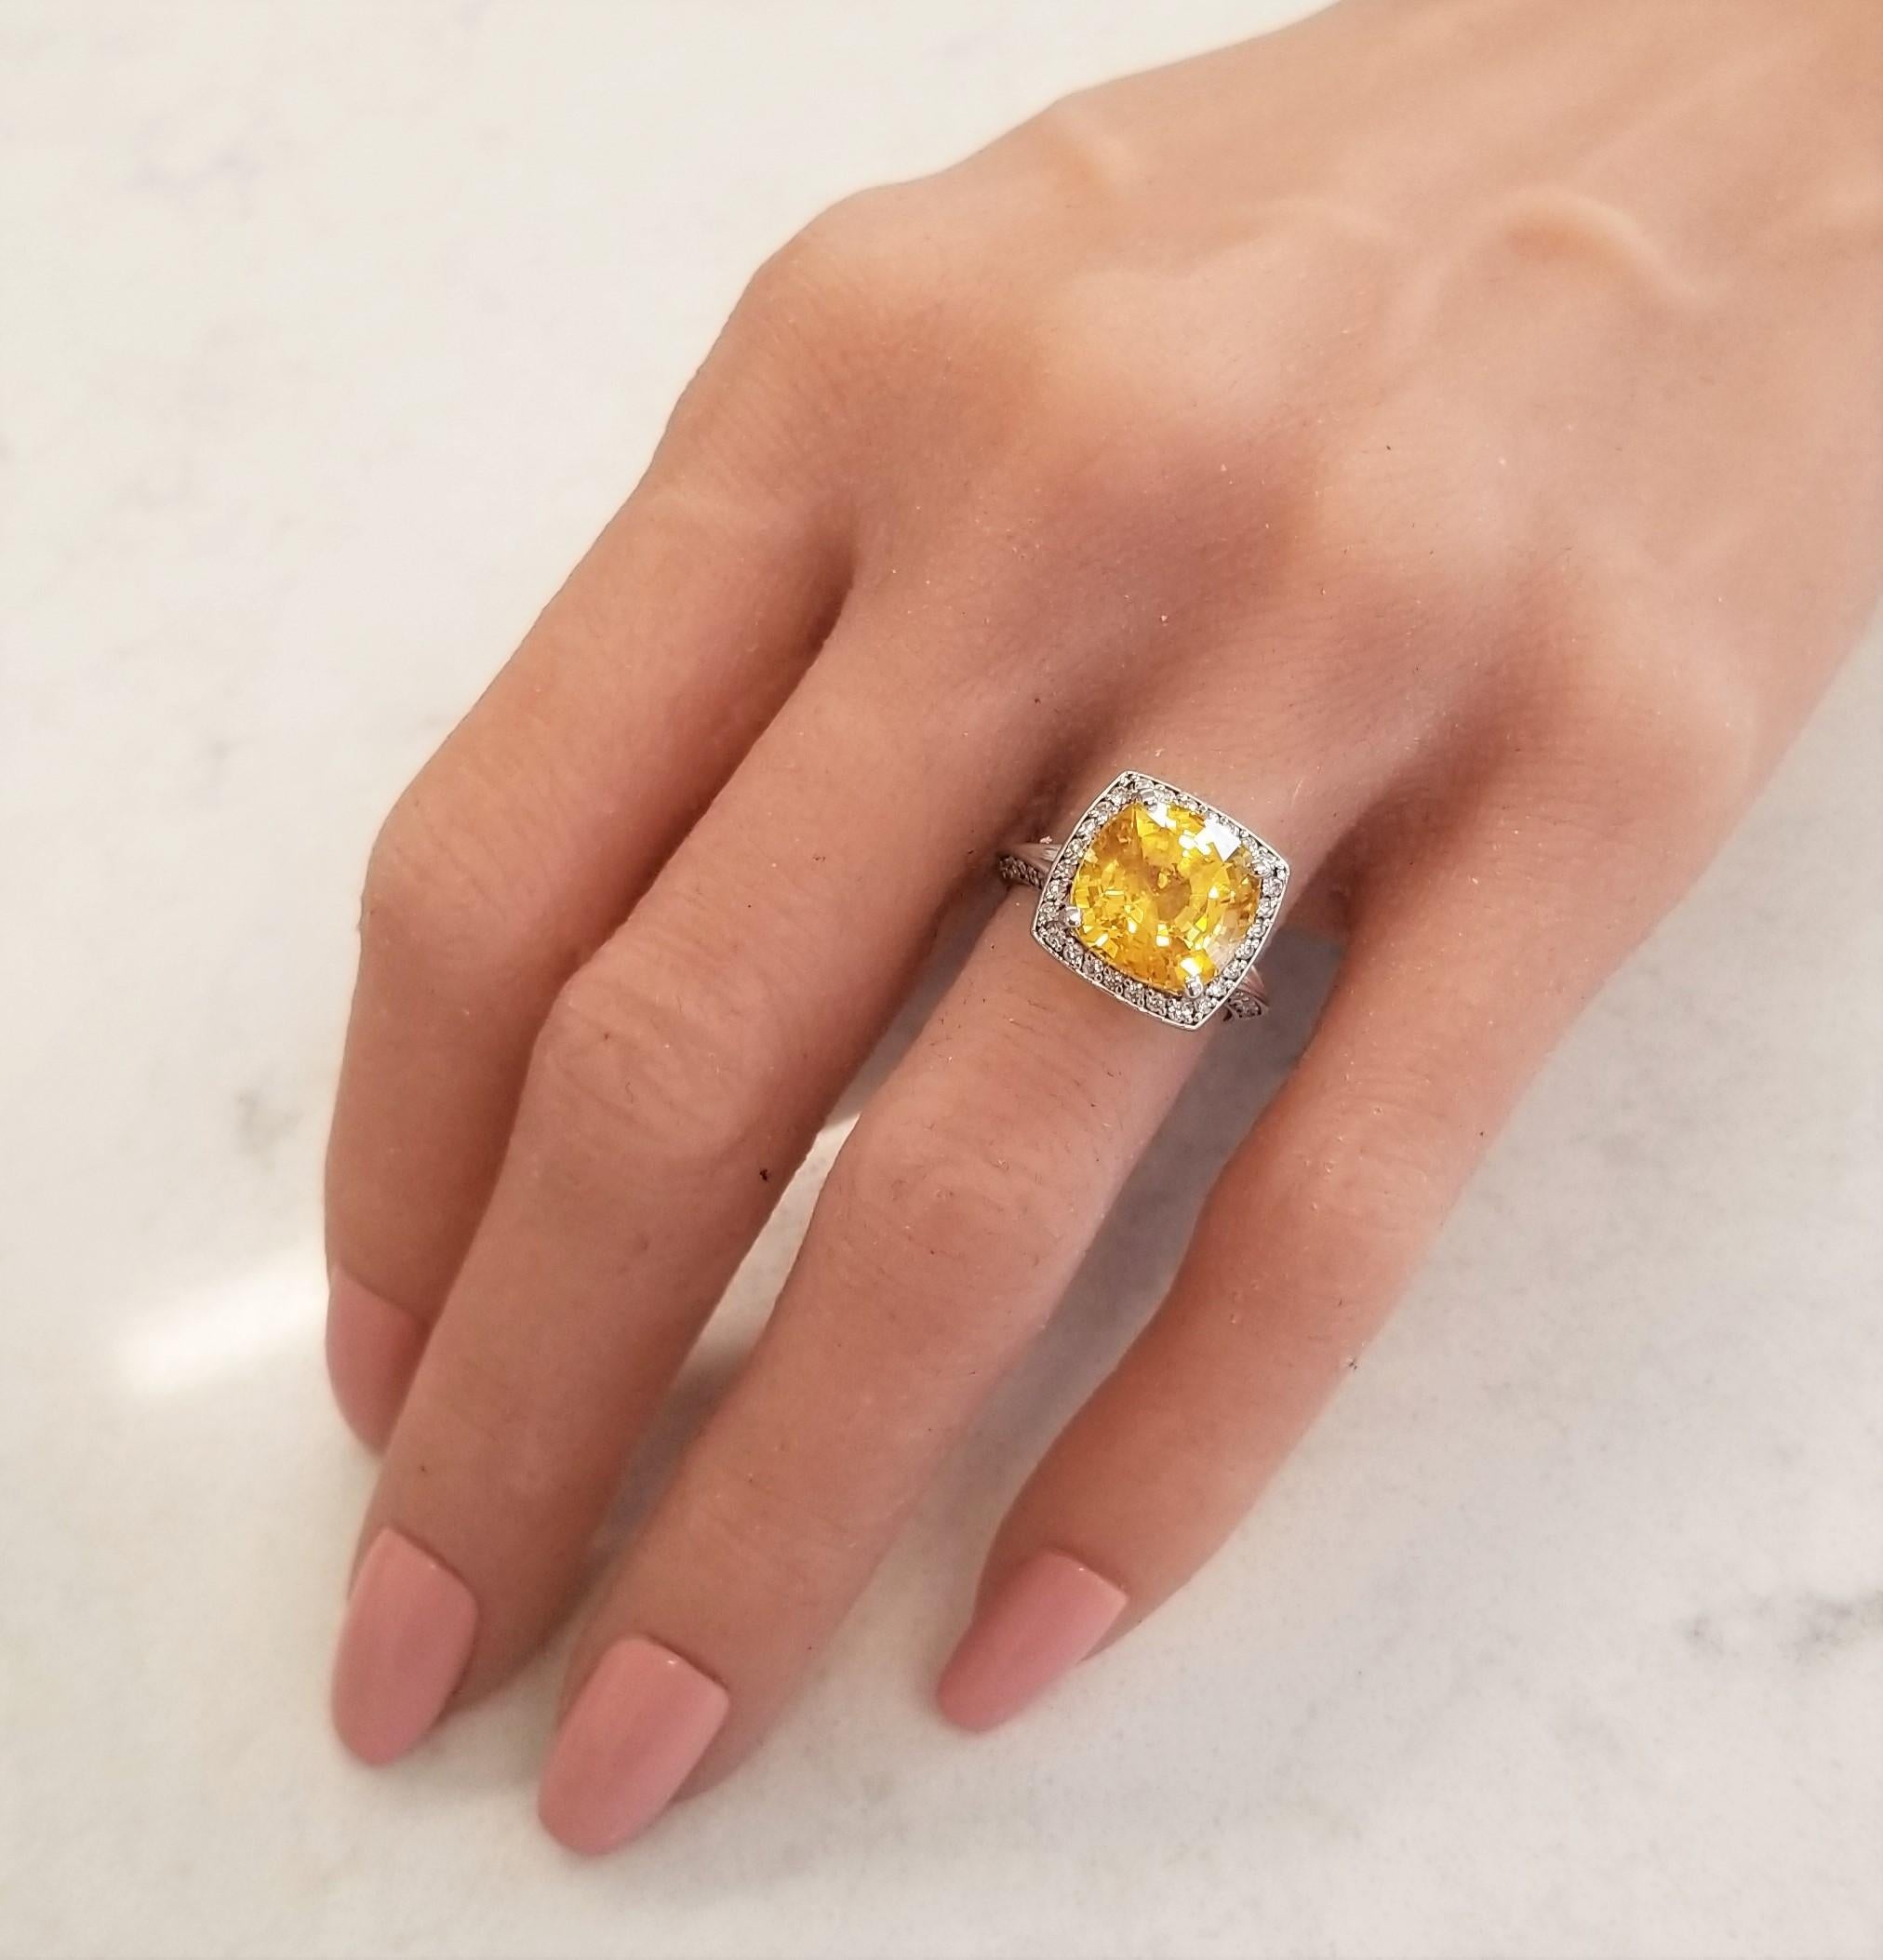 This cocktail halo ring is dripping with vibrancy and scintillation. An 8.20 carat square cushion cut, natural vivid yellow sapphire is obviously notable. It measures 10.57X10.68mm. The gem source is Sri Lanka; its transparency and luster are